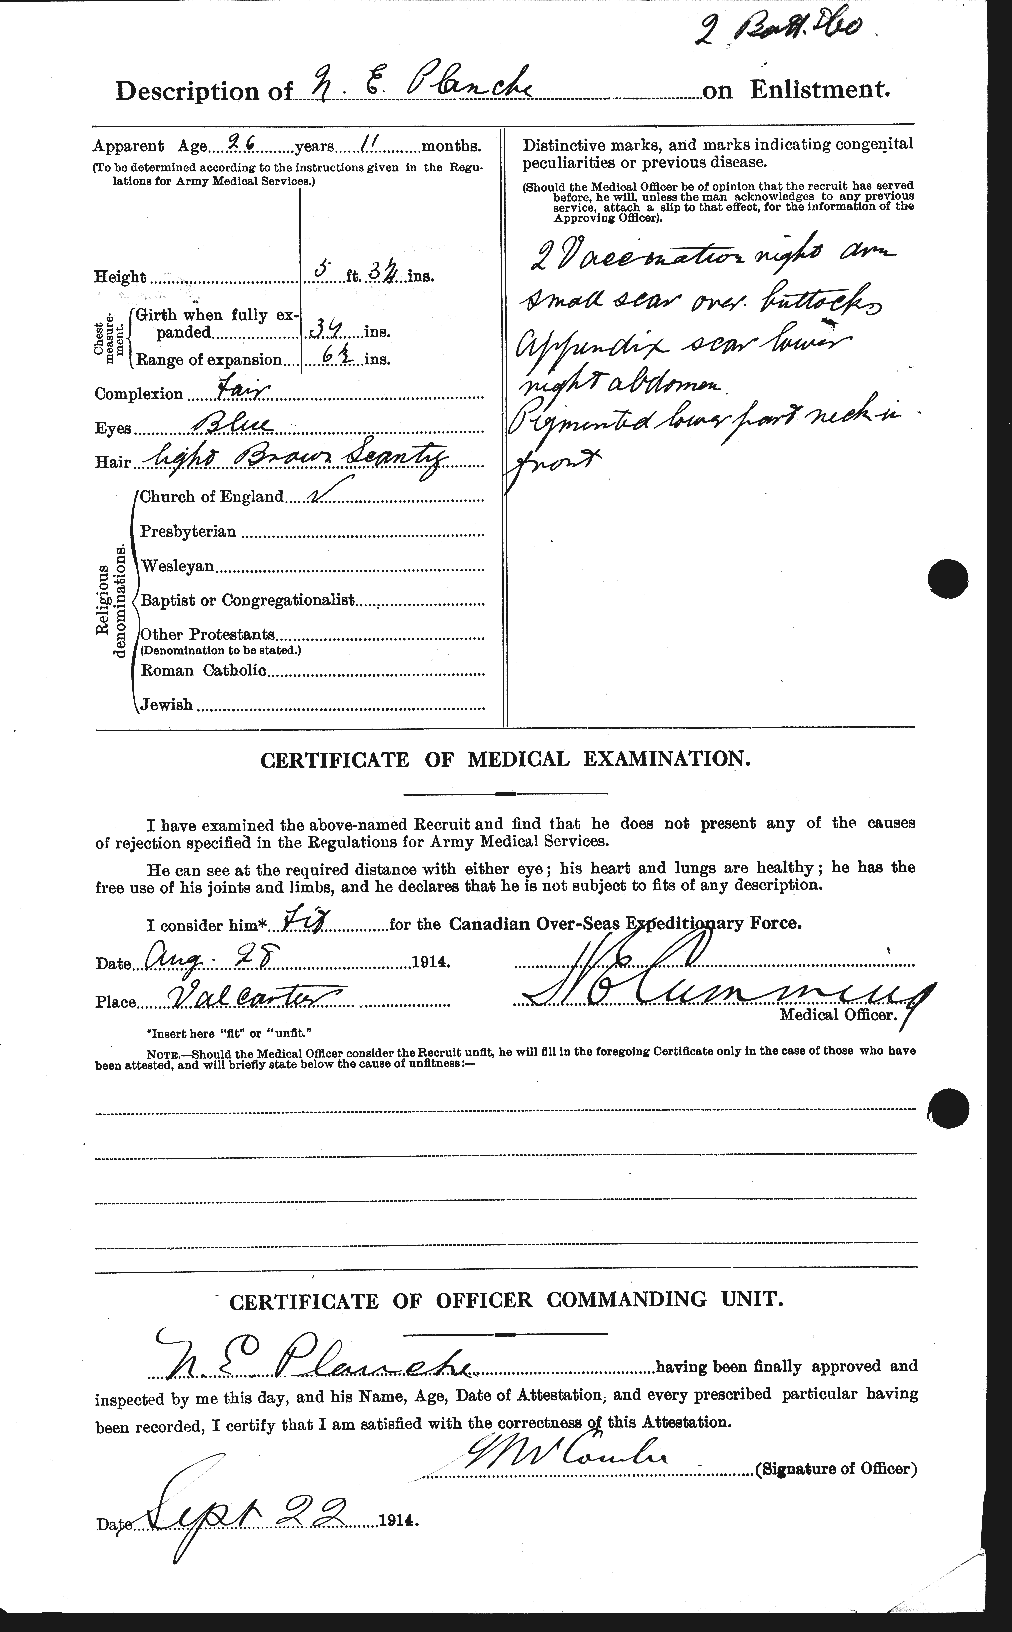 Personnel Records of the First World War - CEF 585483b